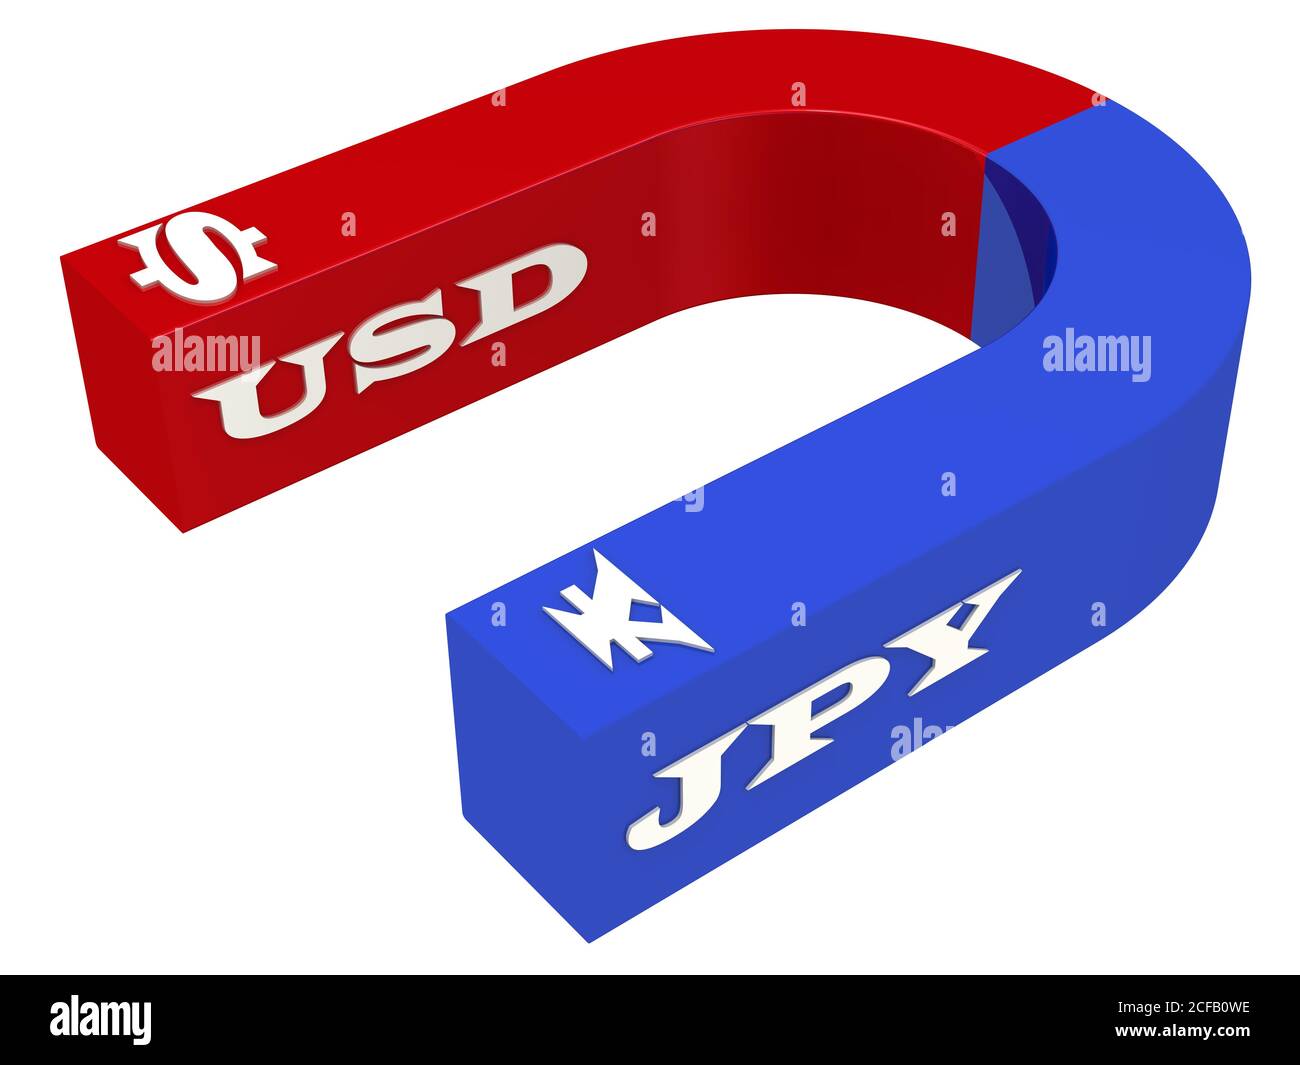 Magnet for money. The arc-shaped magnet with the symbols of the US and Japanese yen currencies. Isolated. 3D illustration Stock Photo